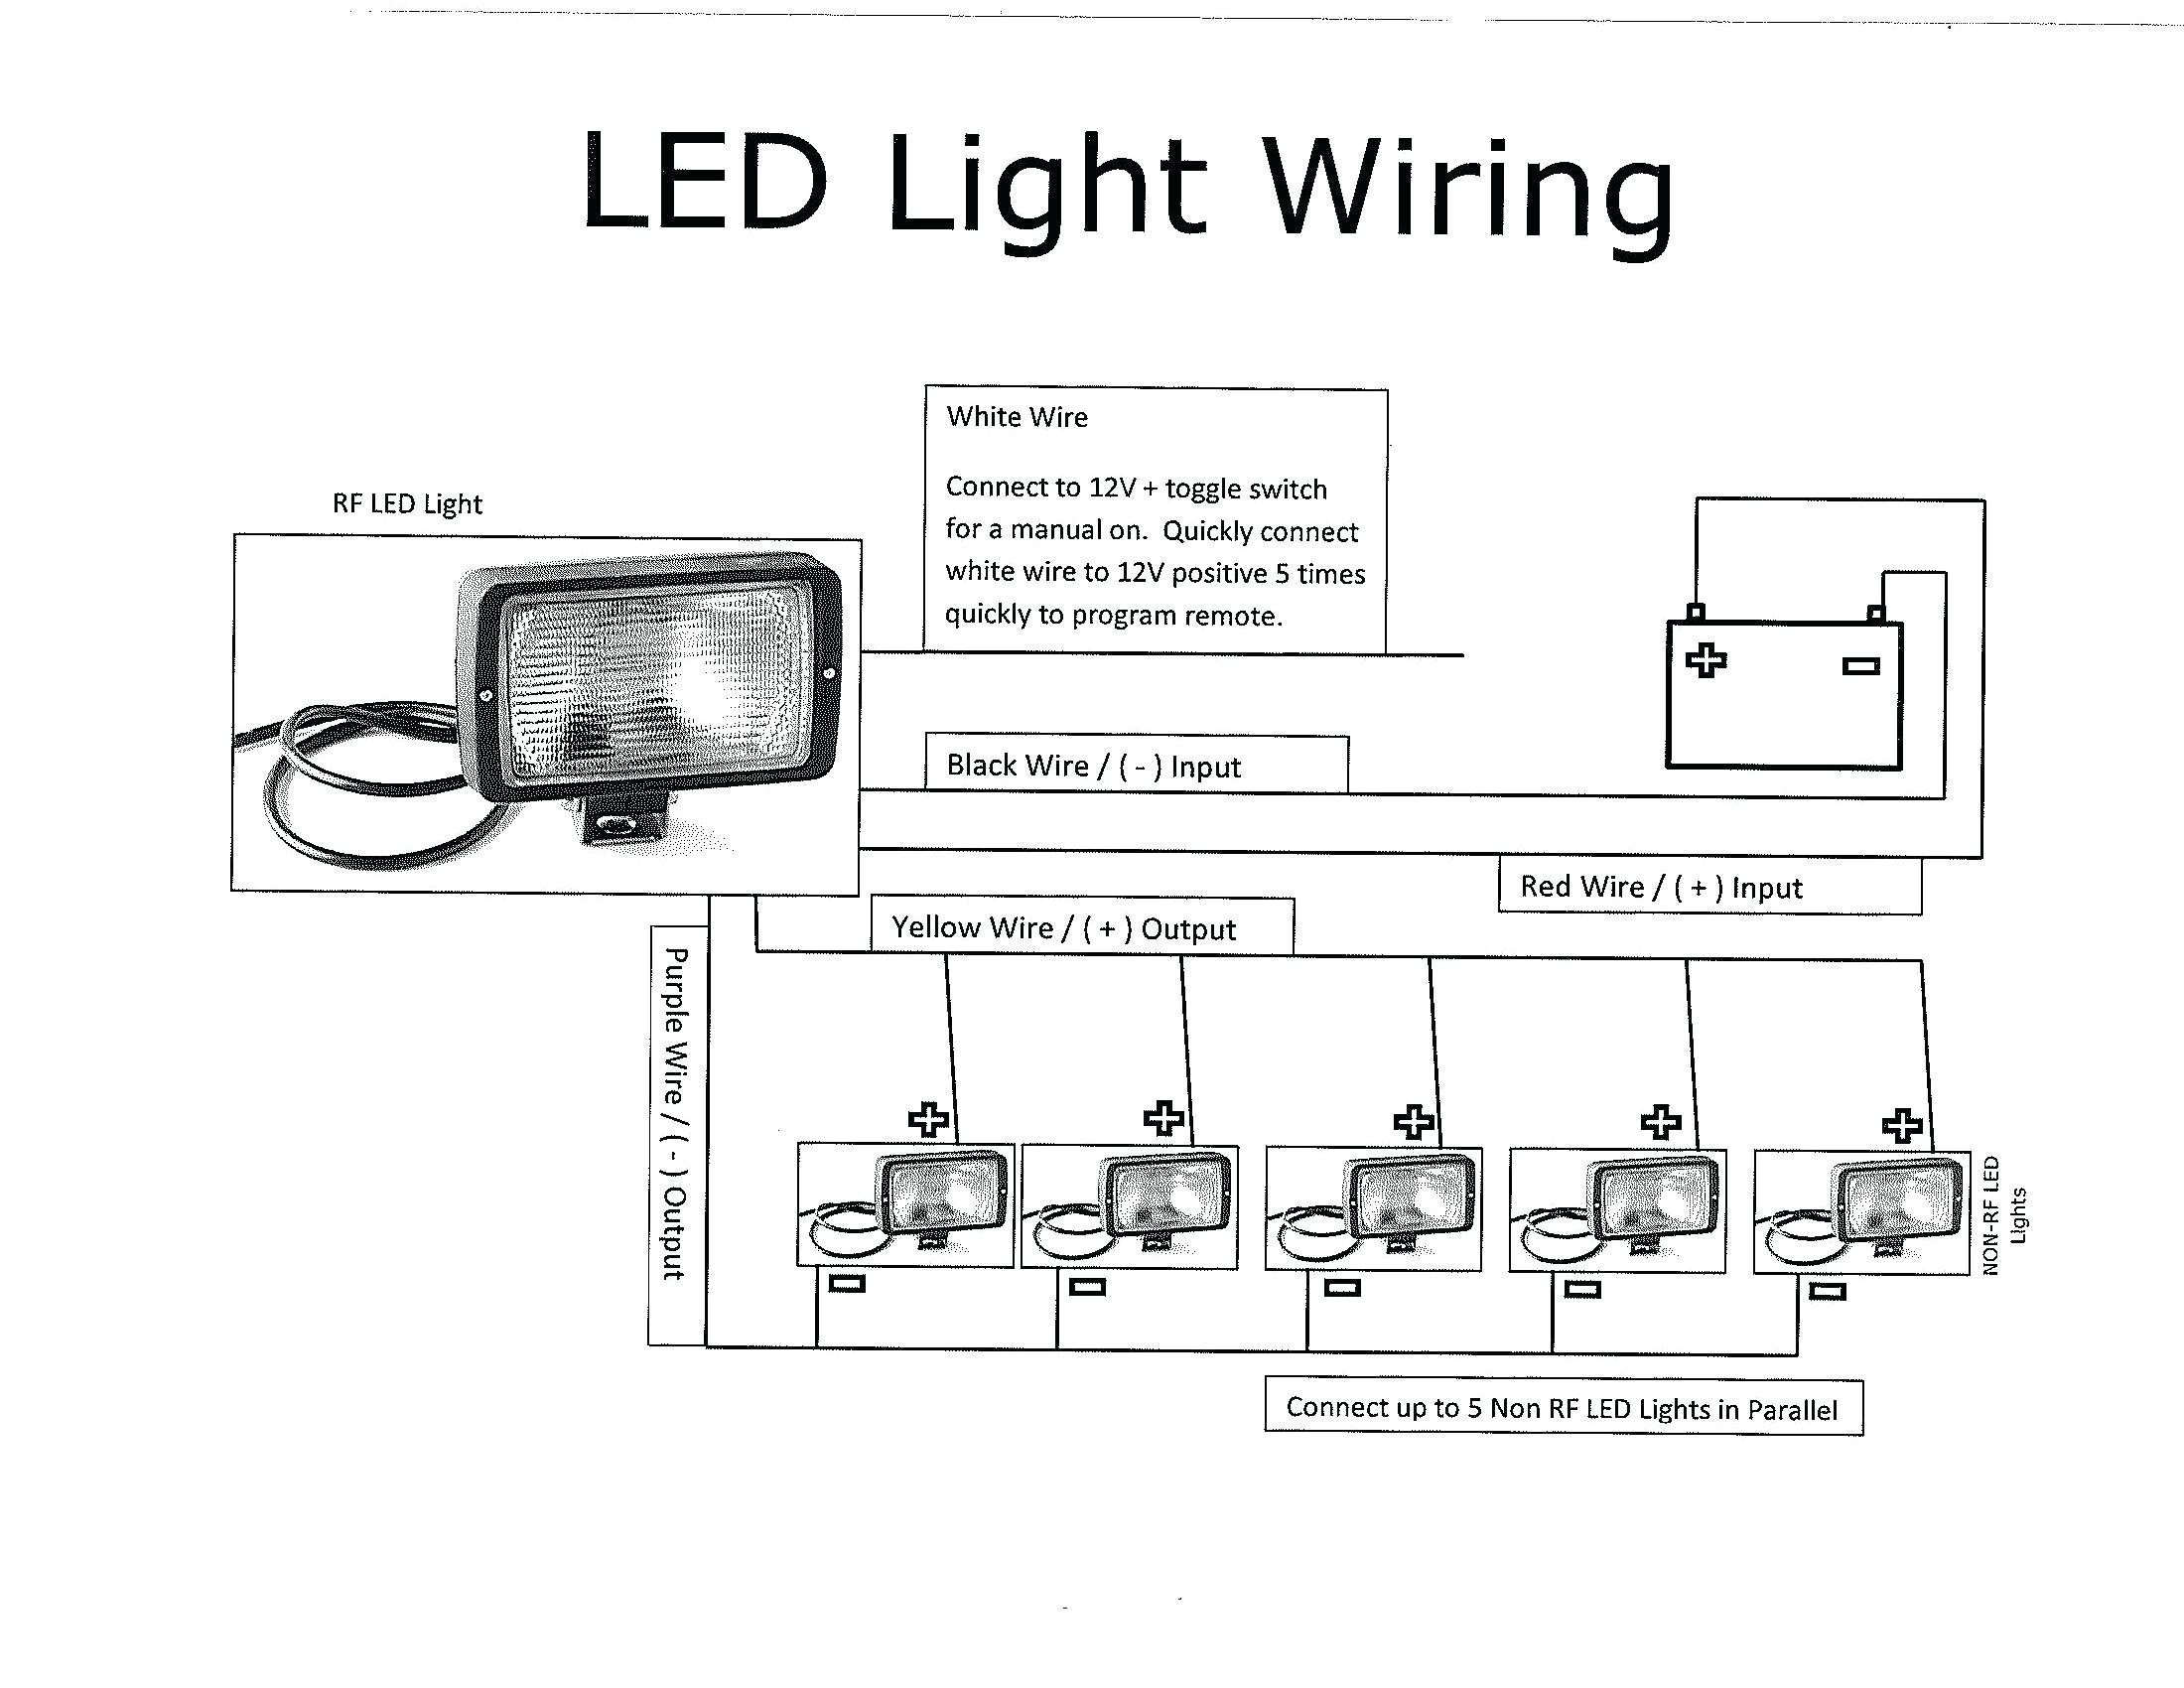 Wiring Diagrams For 6 Recessed Lighting In Series New Wiring Diagram Lights In Parallel Valid Wiring Diagram Recessed